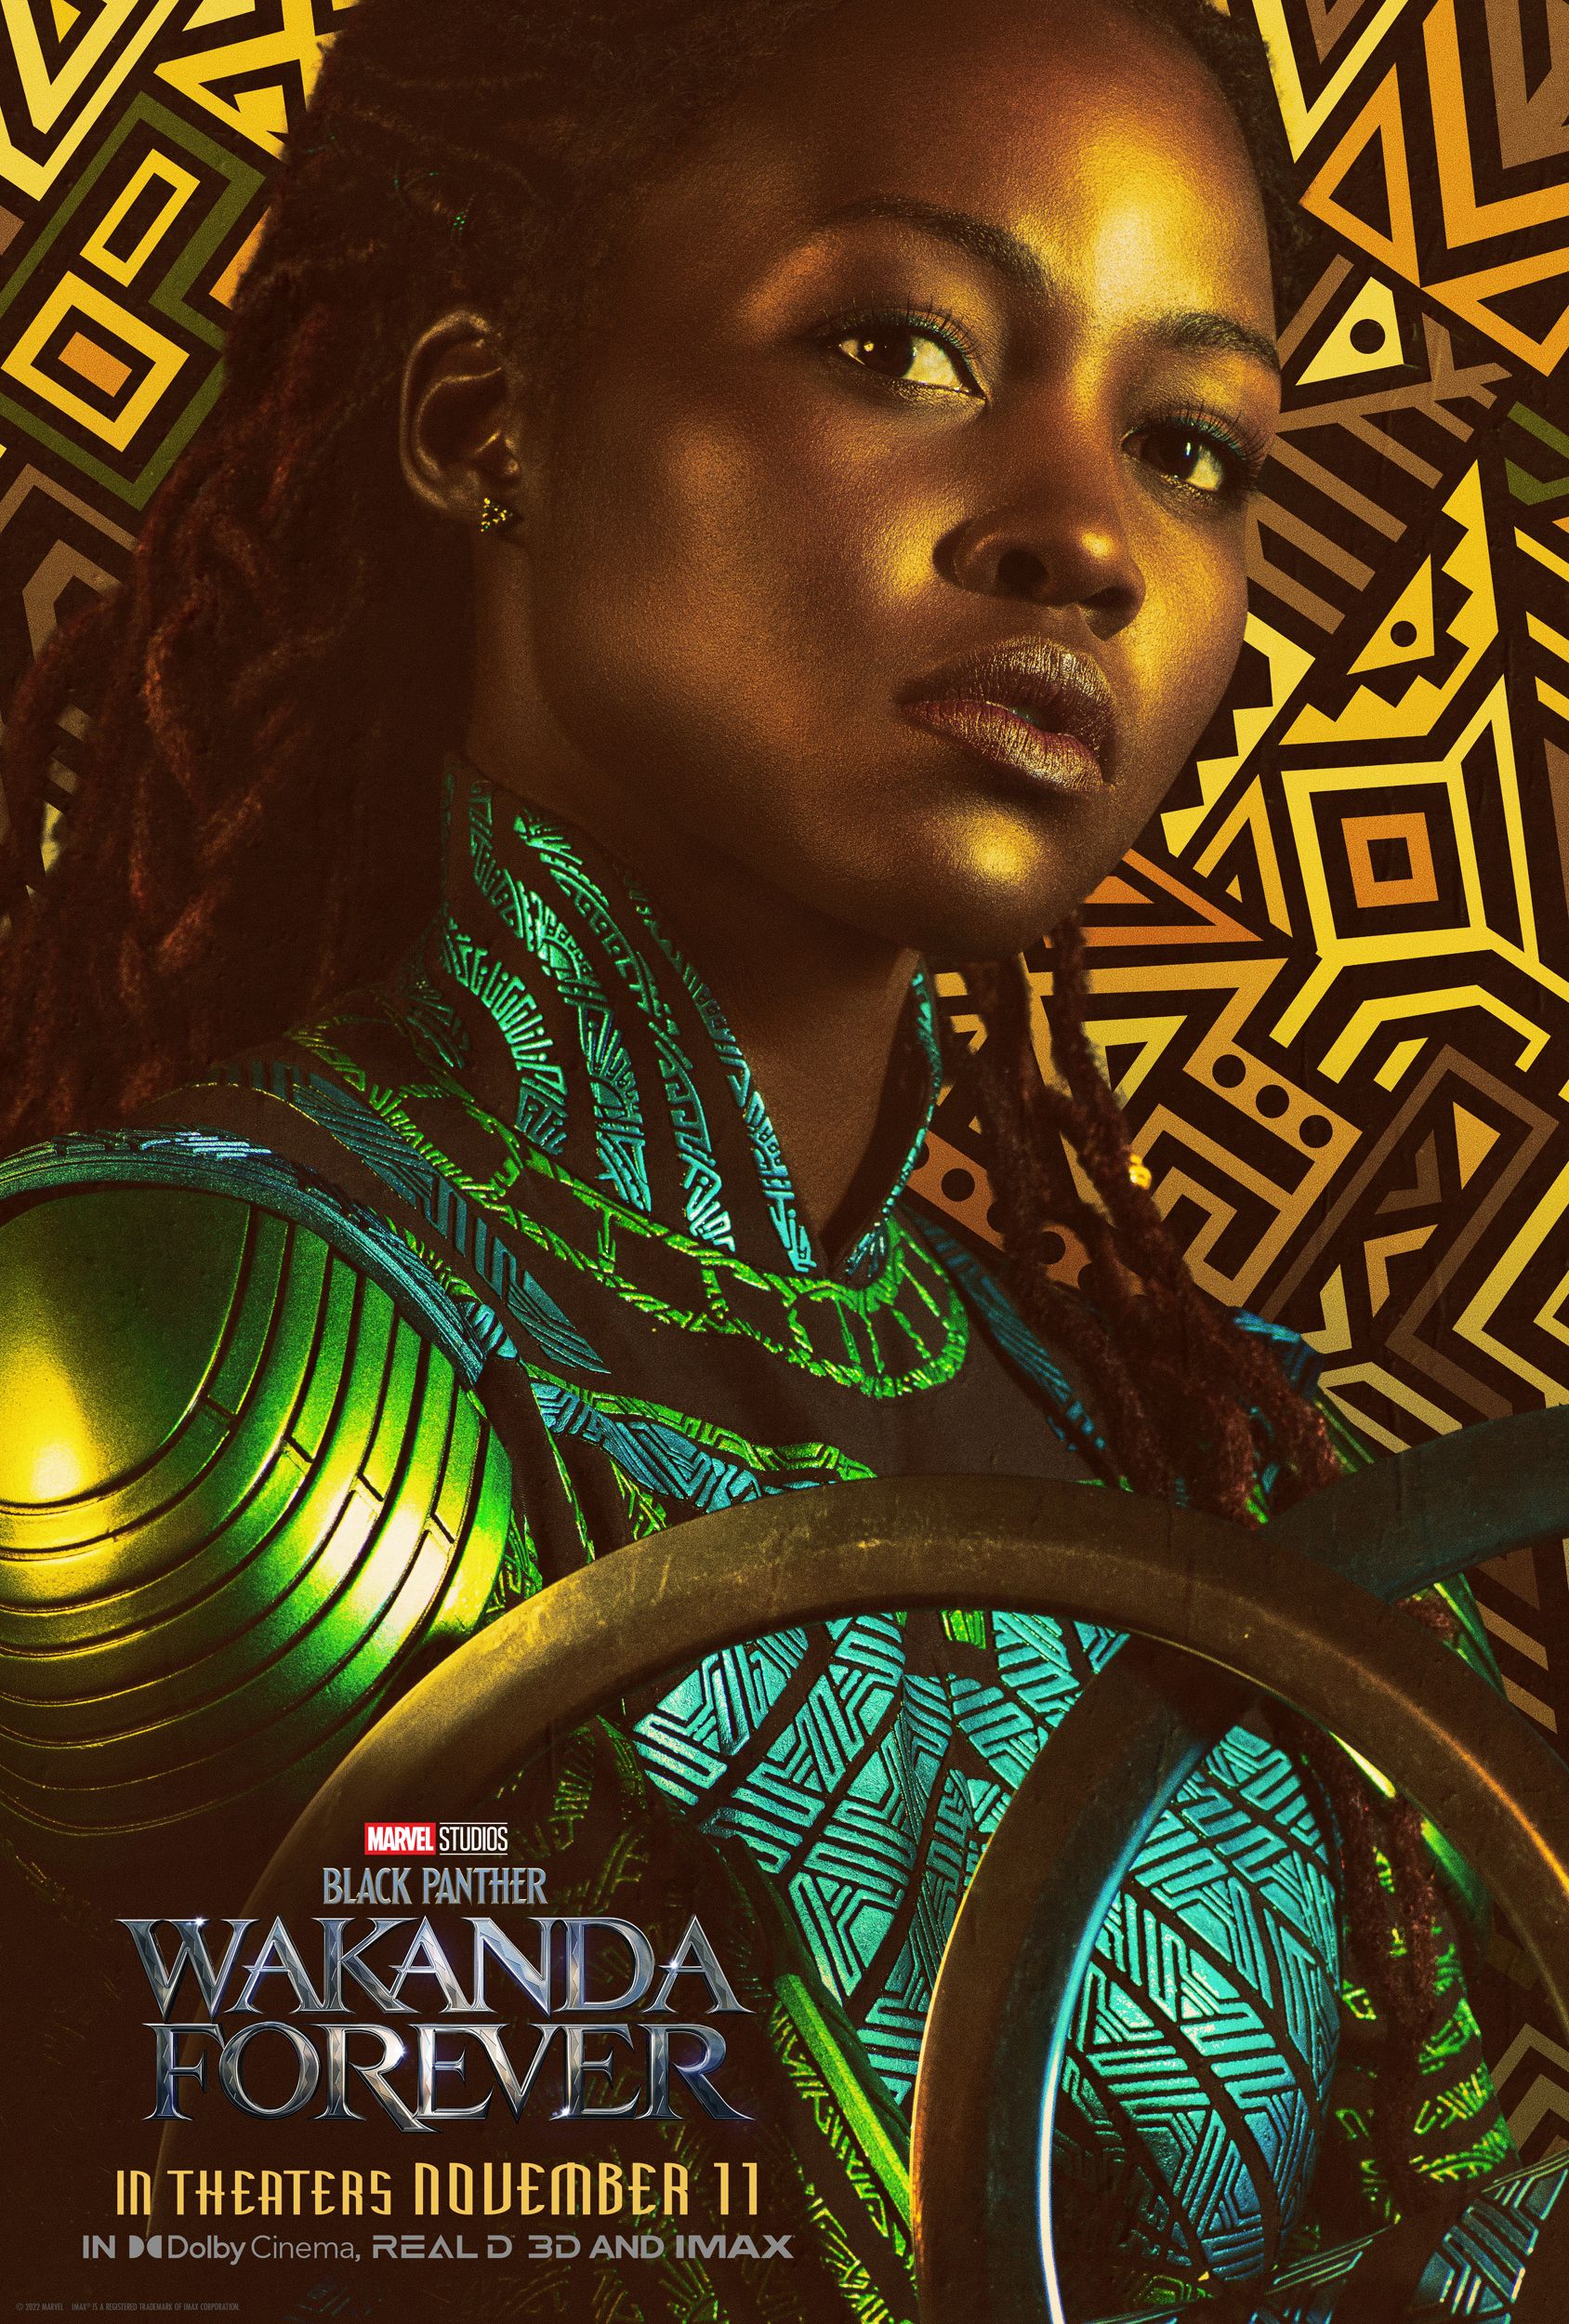 Lupita Nyong'o in a poster for Black Panther: Wakanda Forever